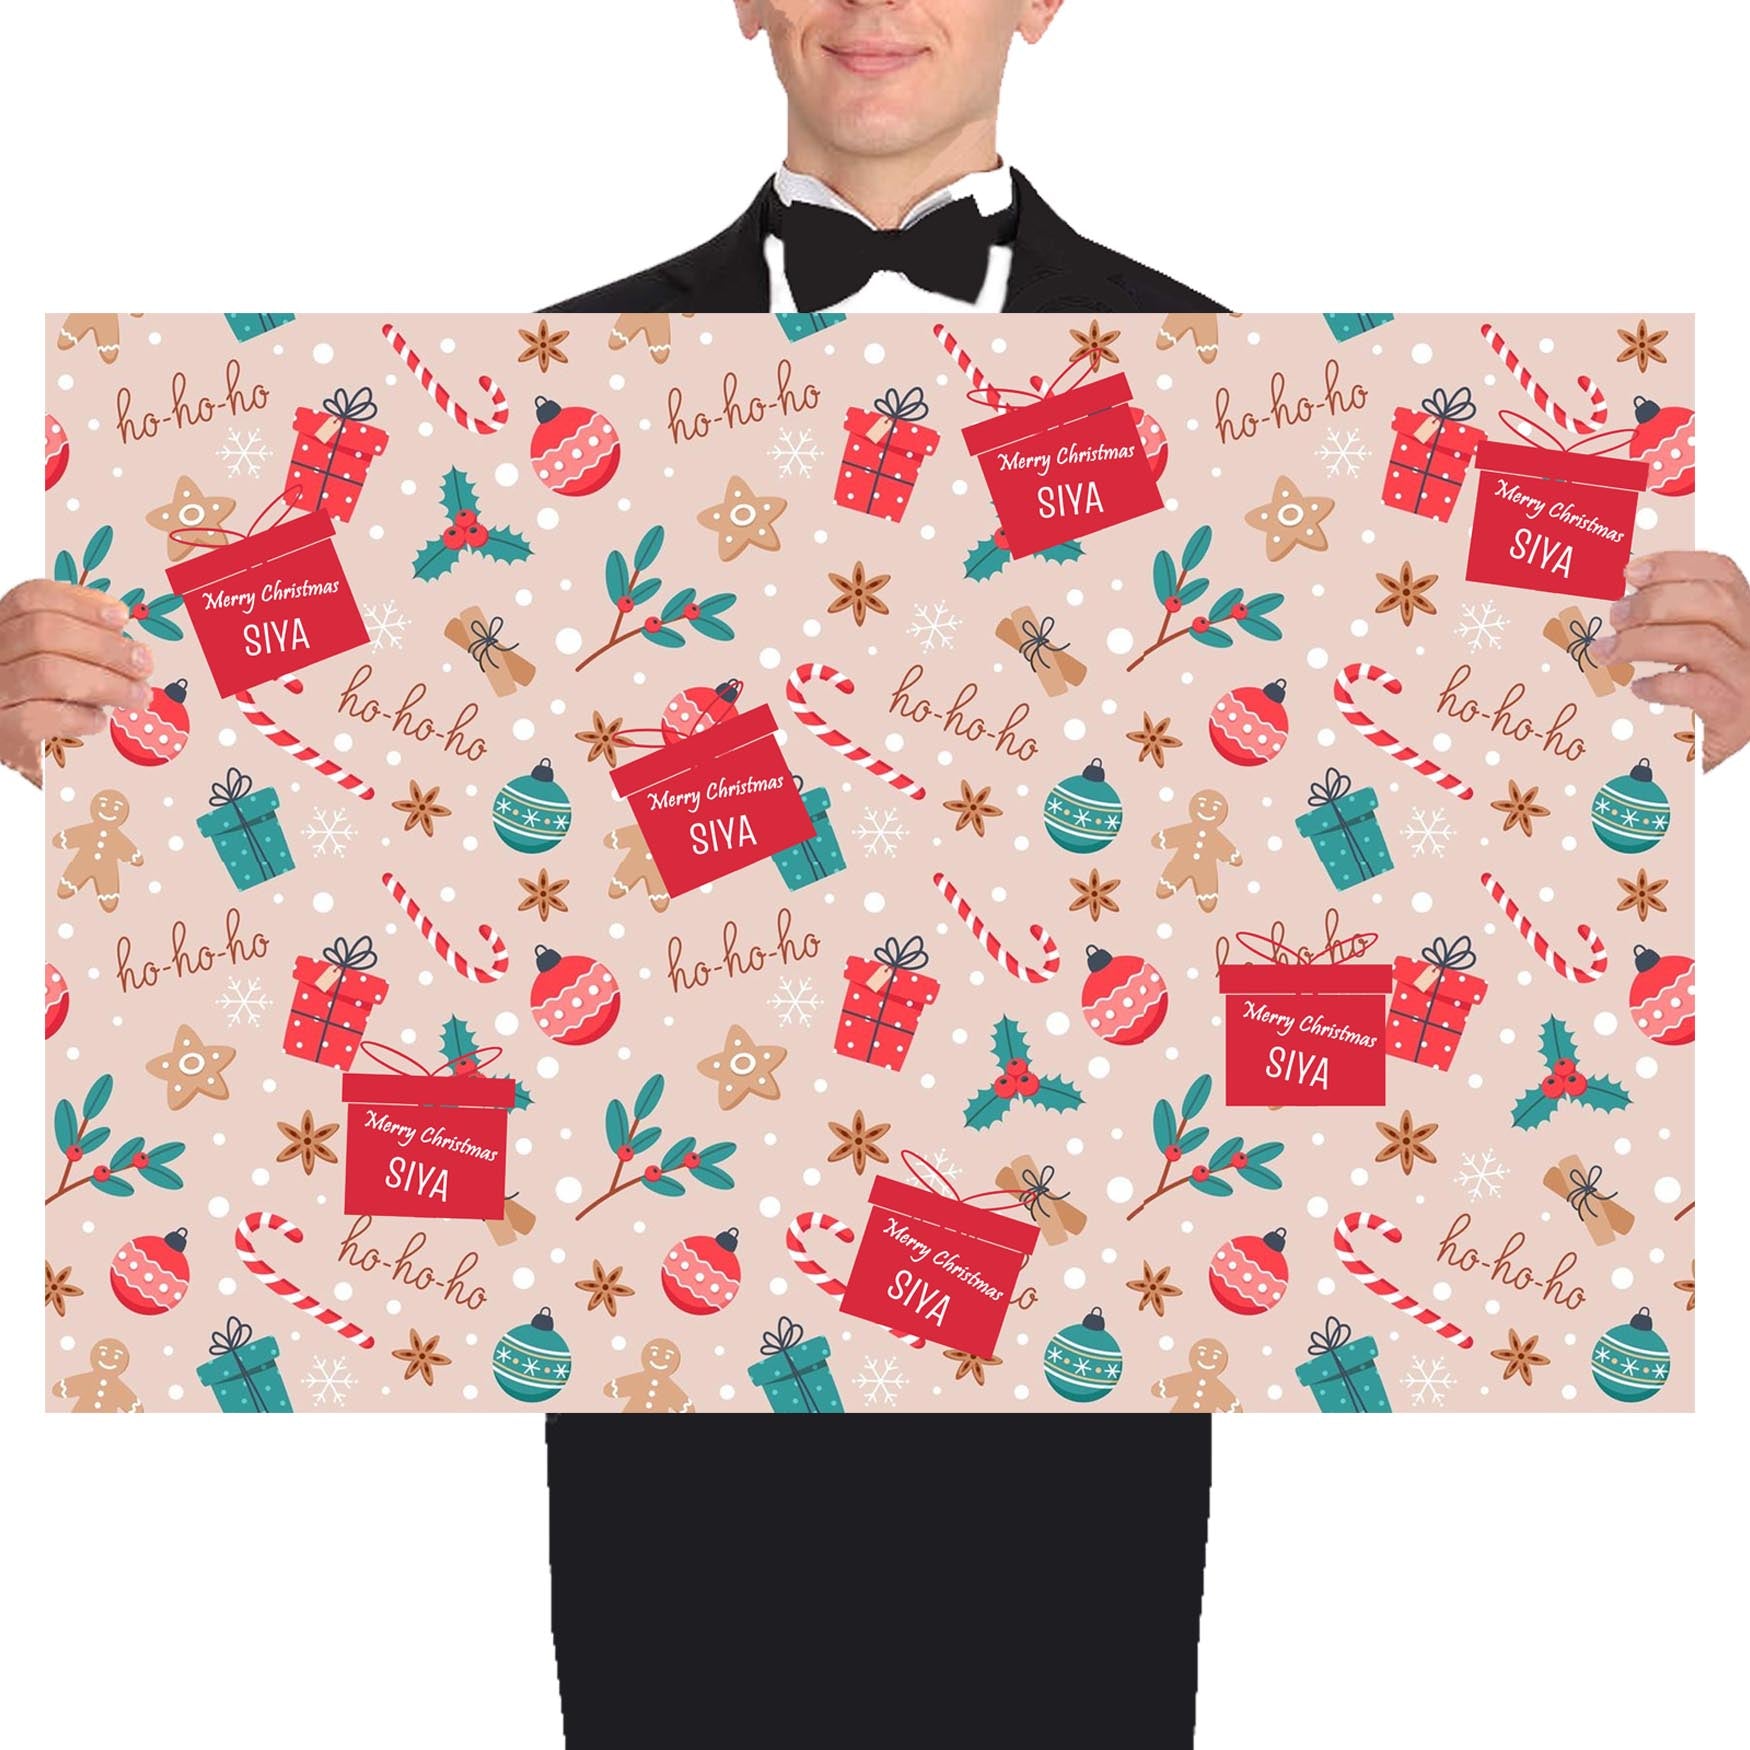 Personalized Christmas Gift Wrapping Paper